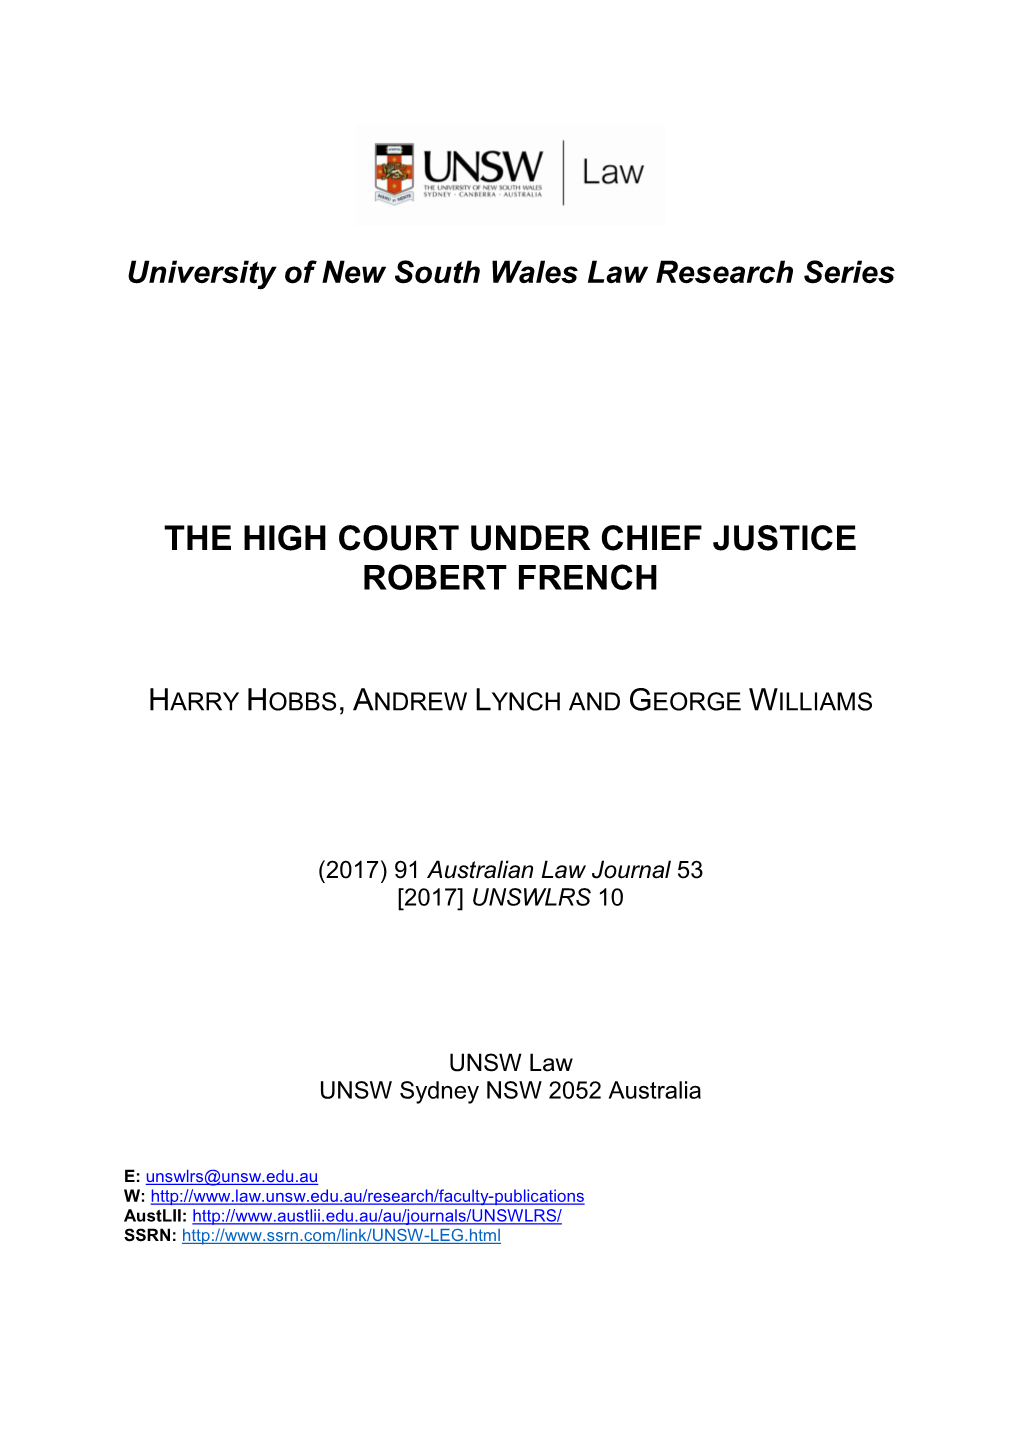 The High Court Under Chief Justice Robert French